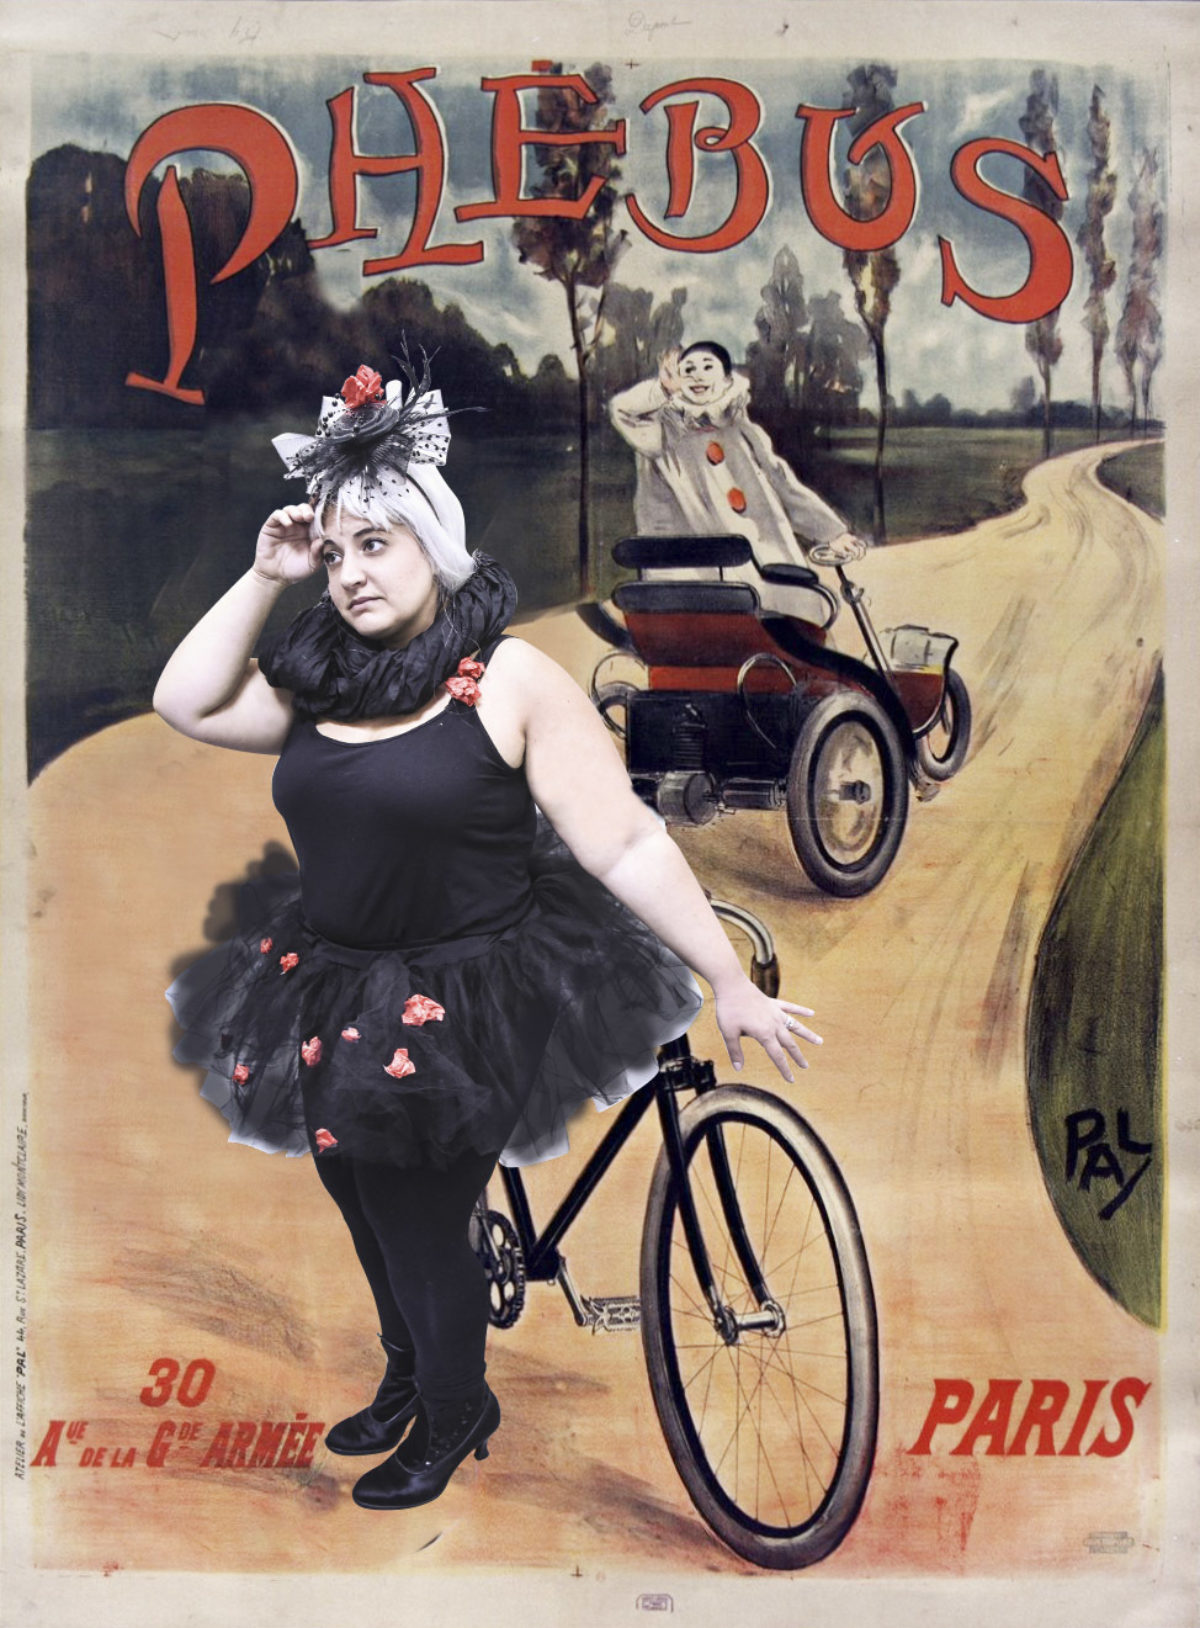 A woman in a black tutu is posing in a poster illustration of a clown in a small car.